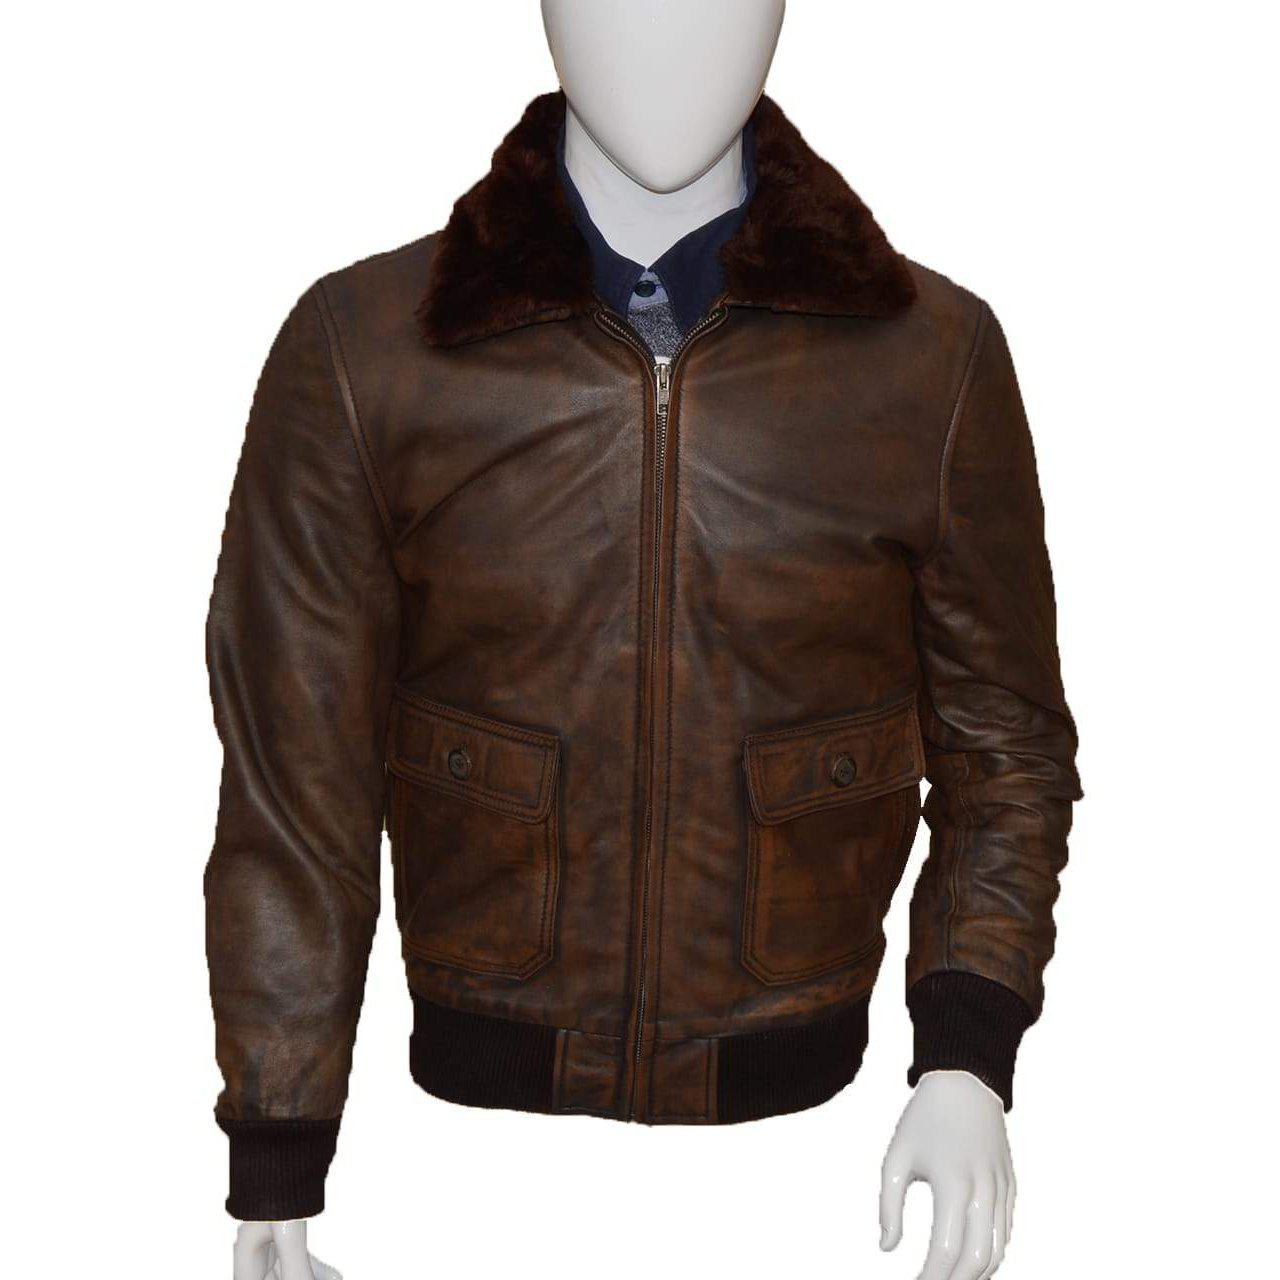 Distressed brown leather jacket | Leather Jacket Mens